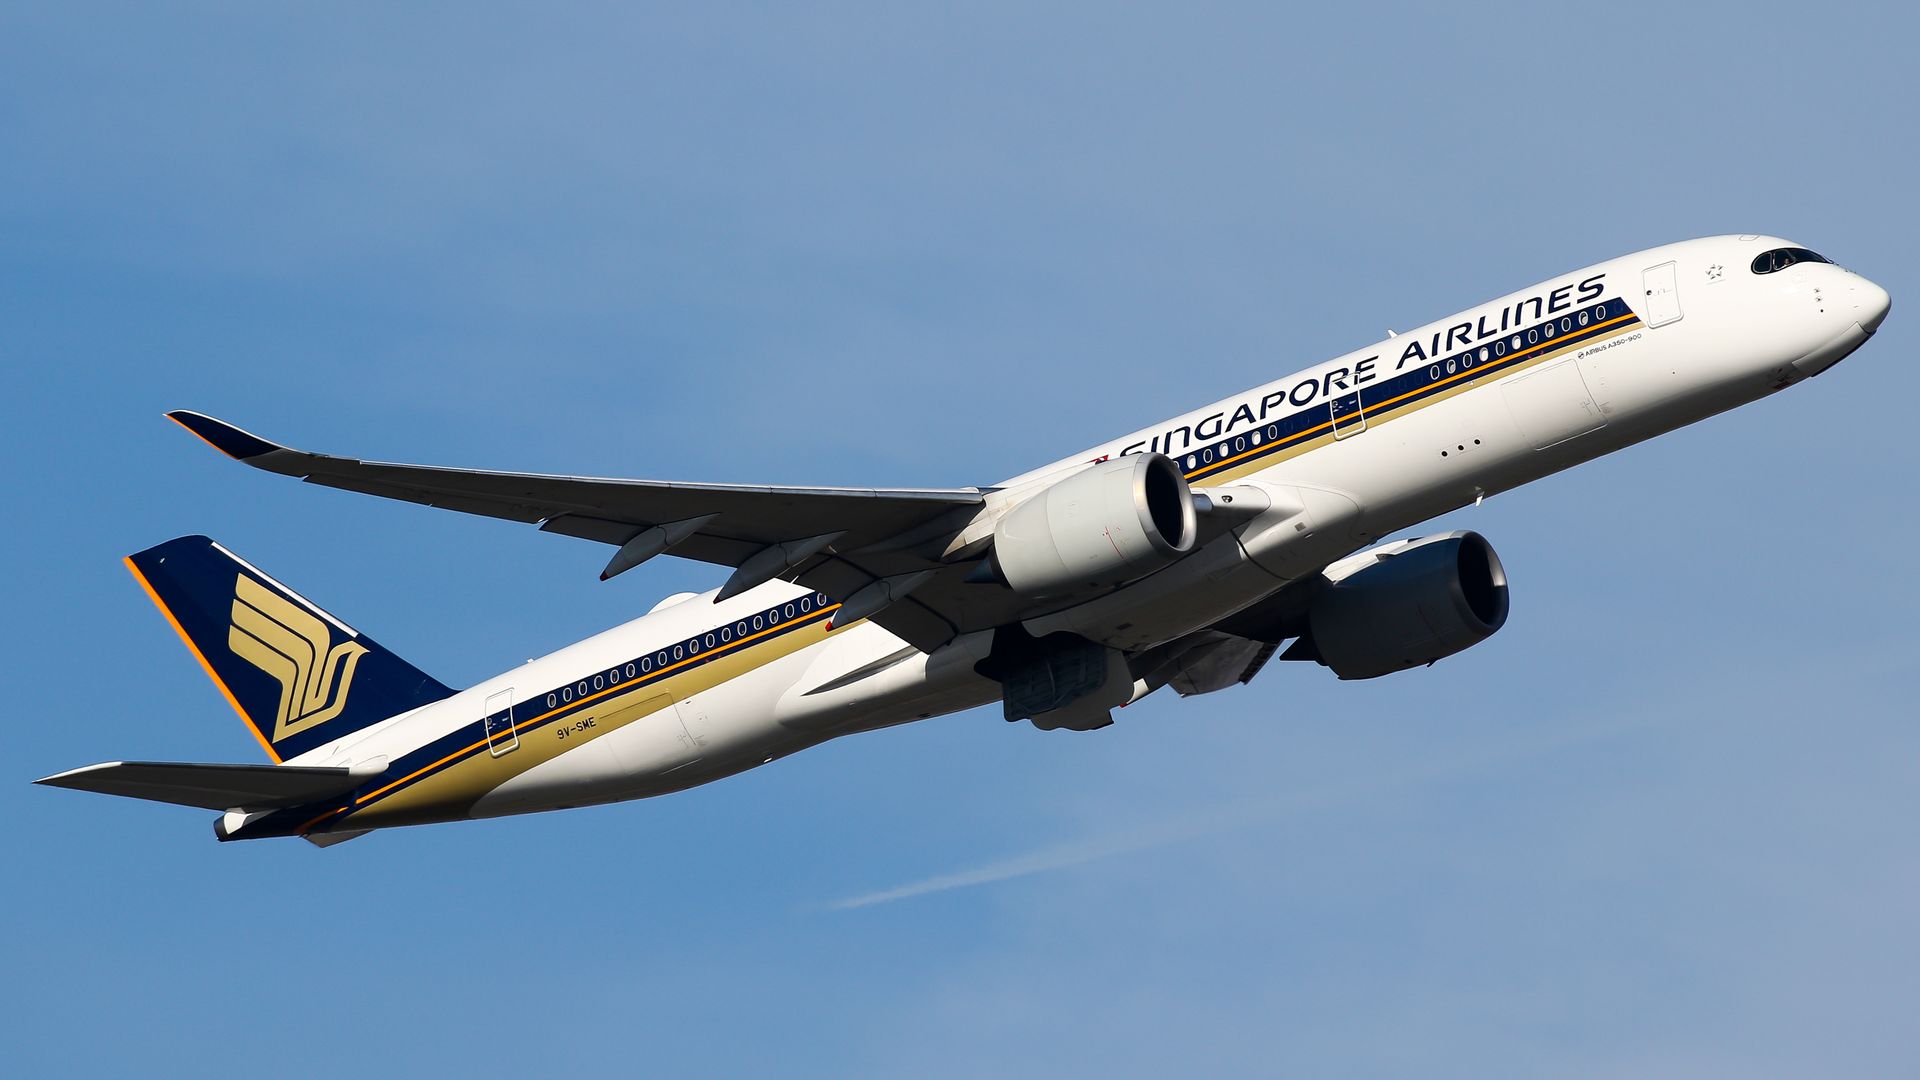 Singapore airlines flight taking off